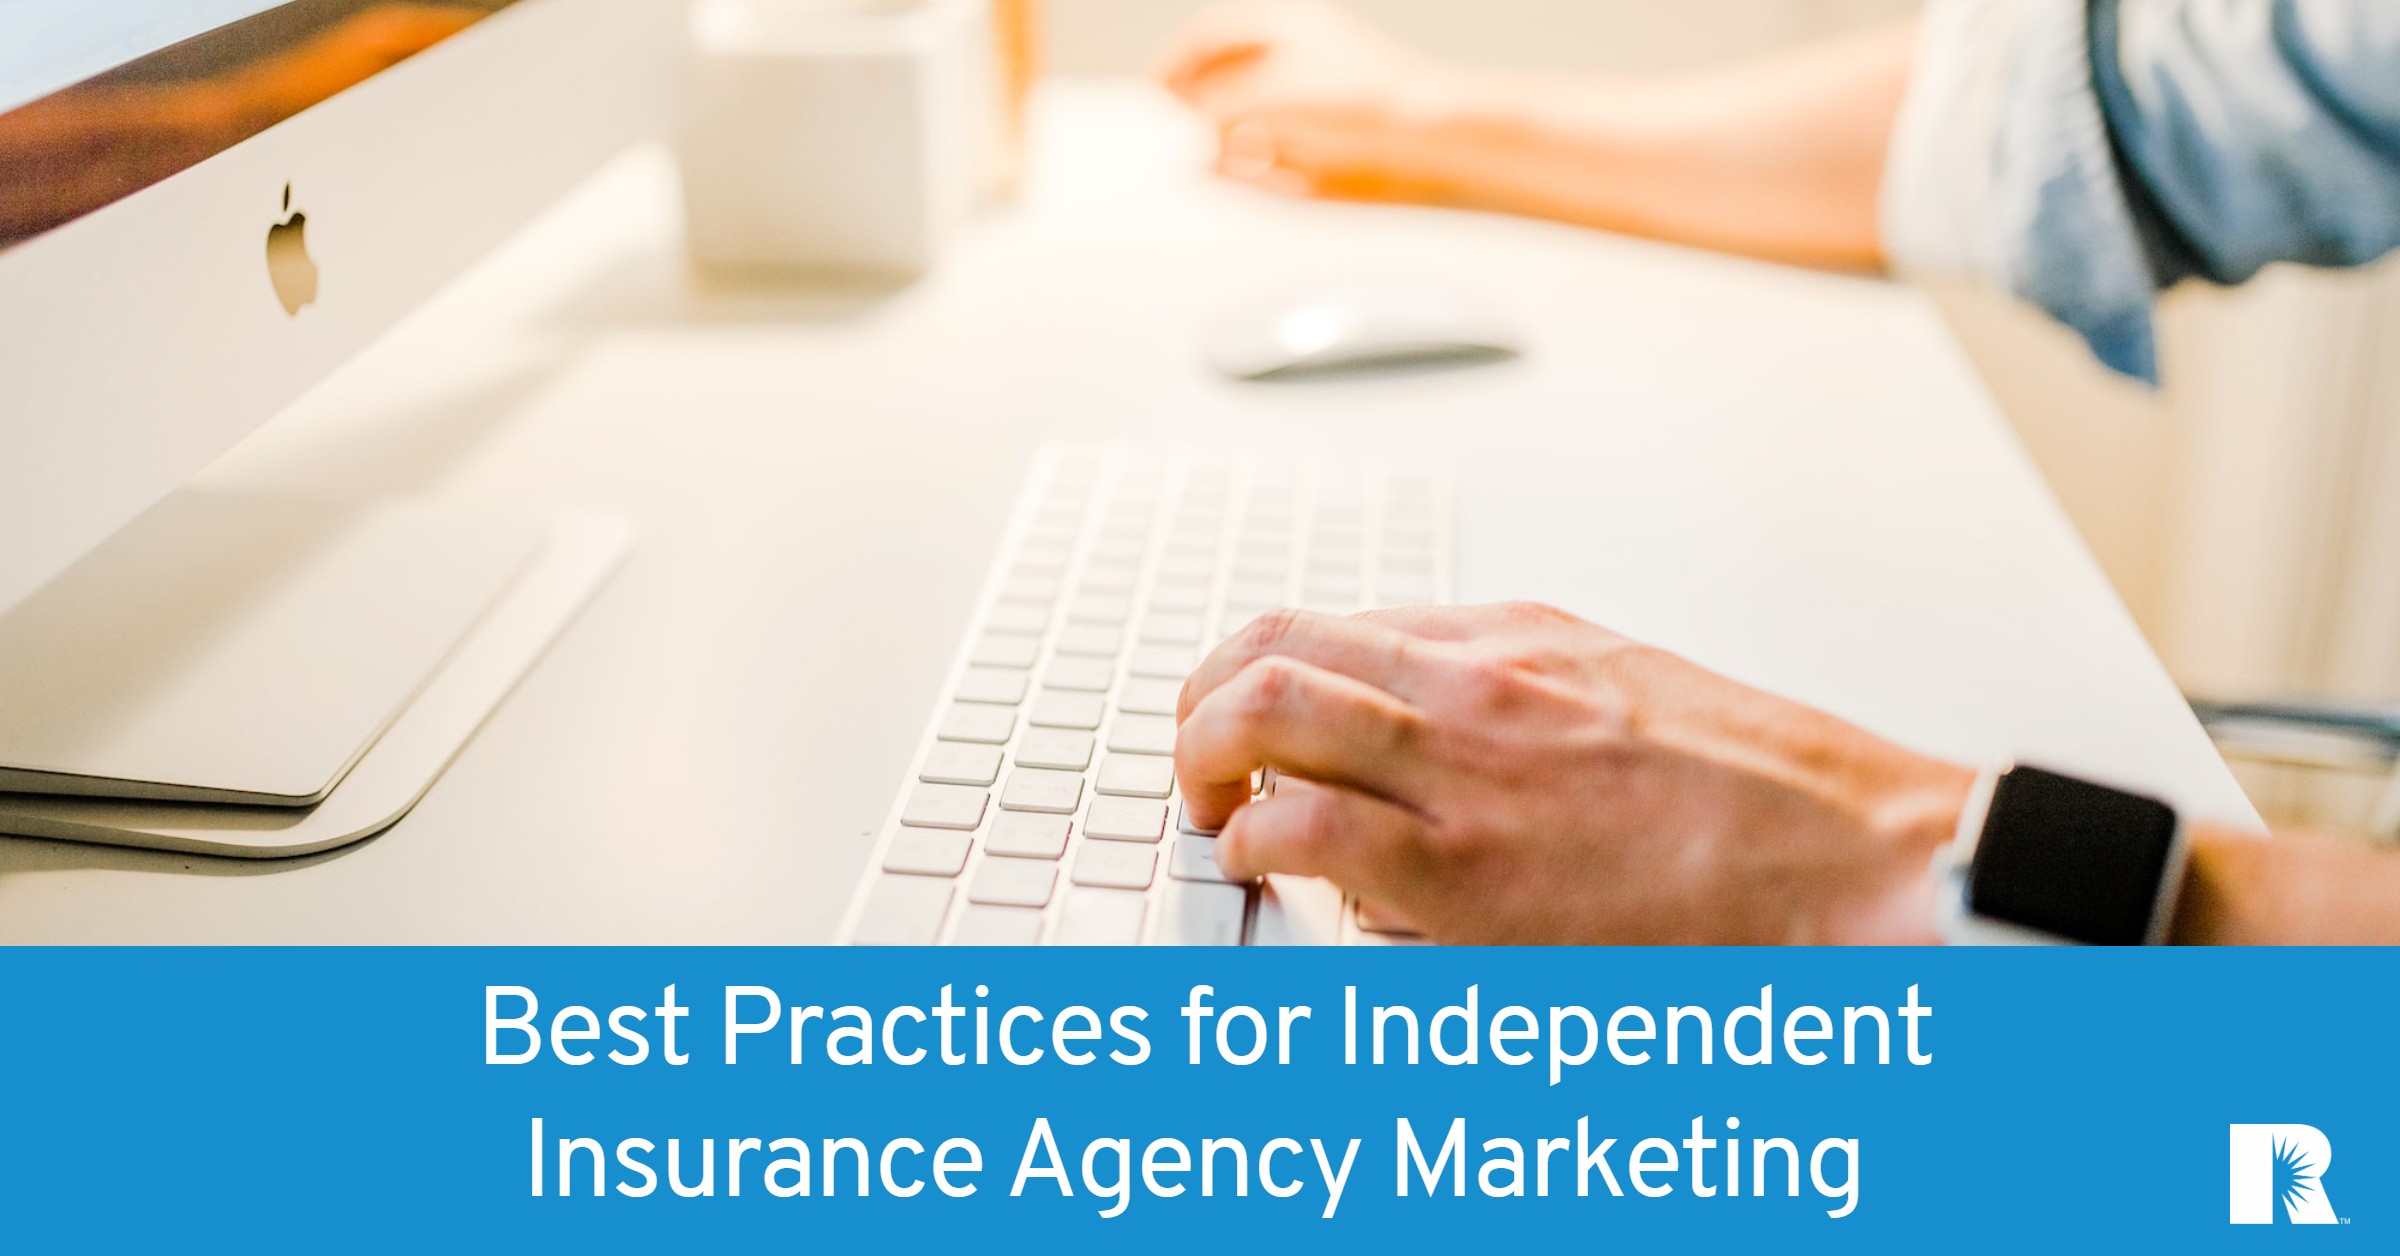 An insurance agency owner searches for tips on agency marketing.